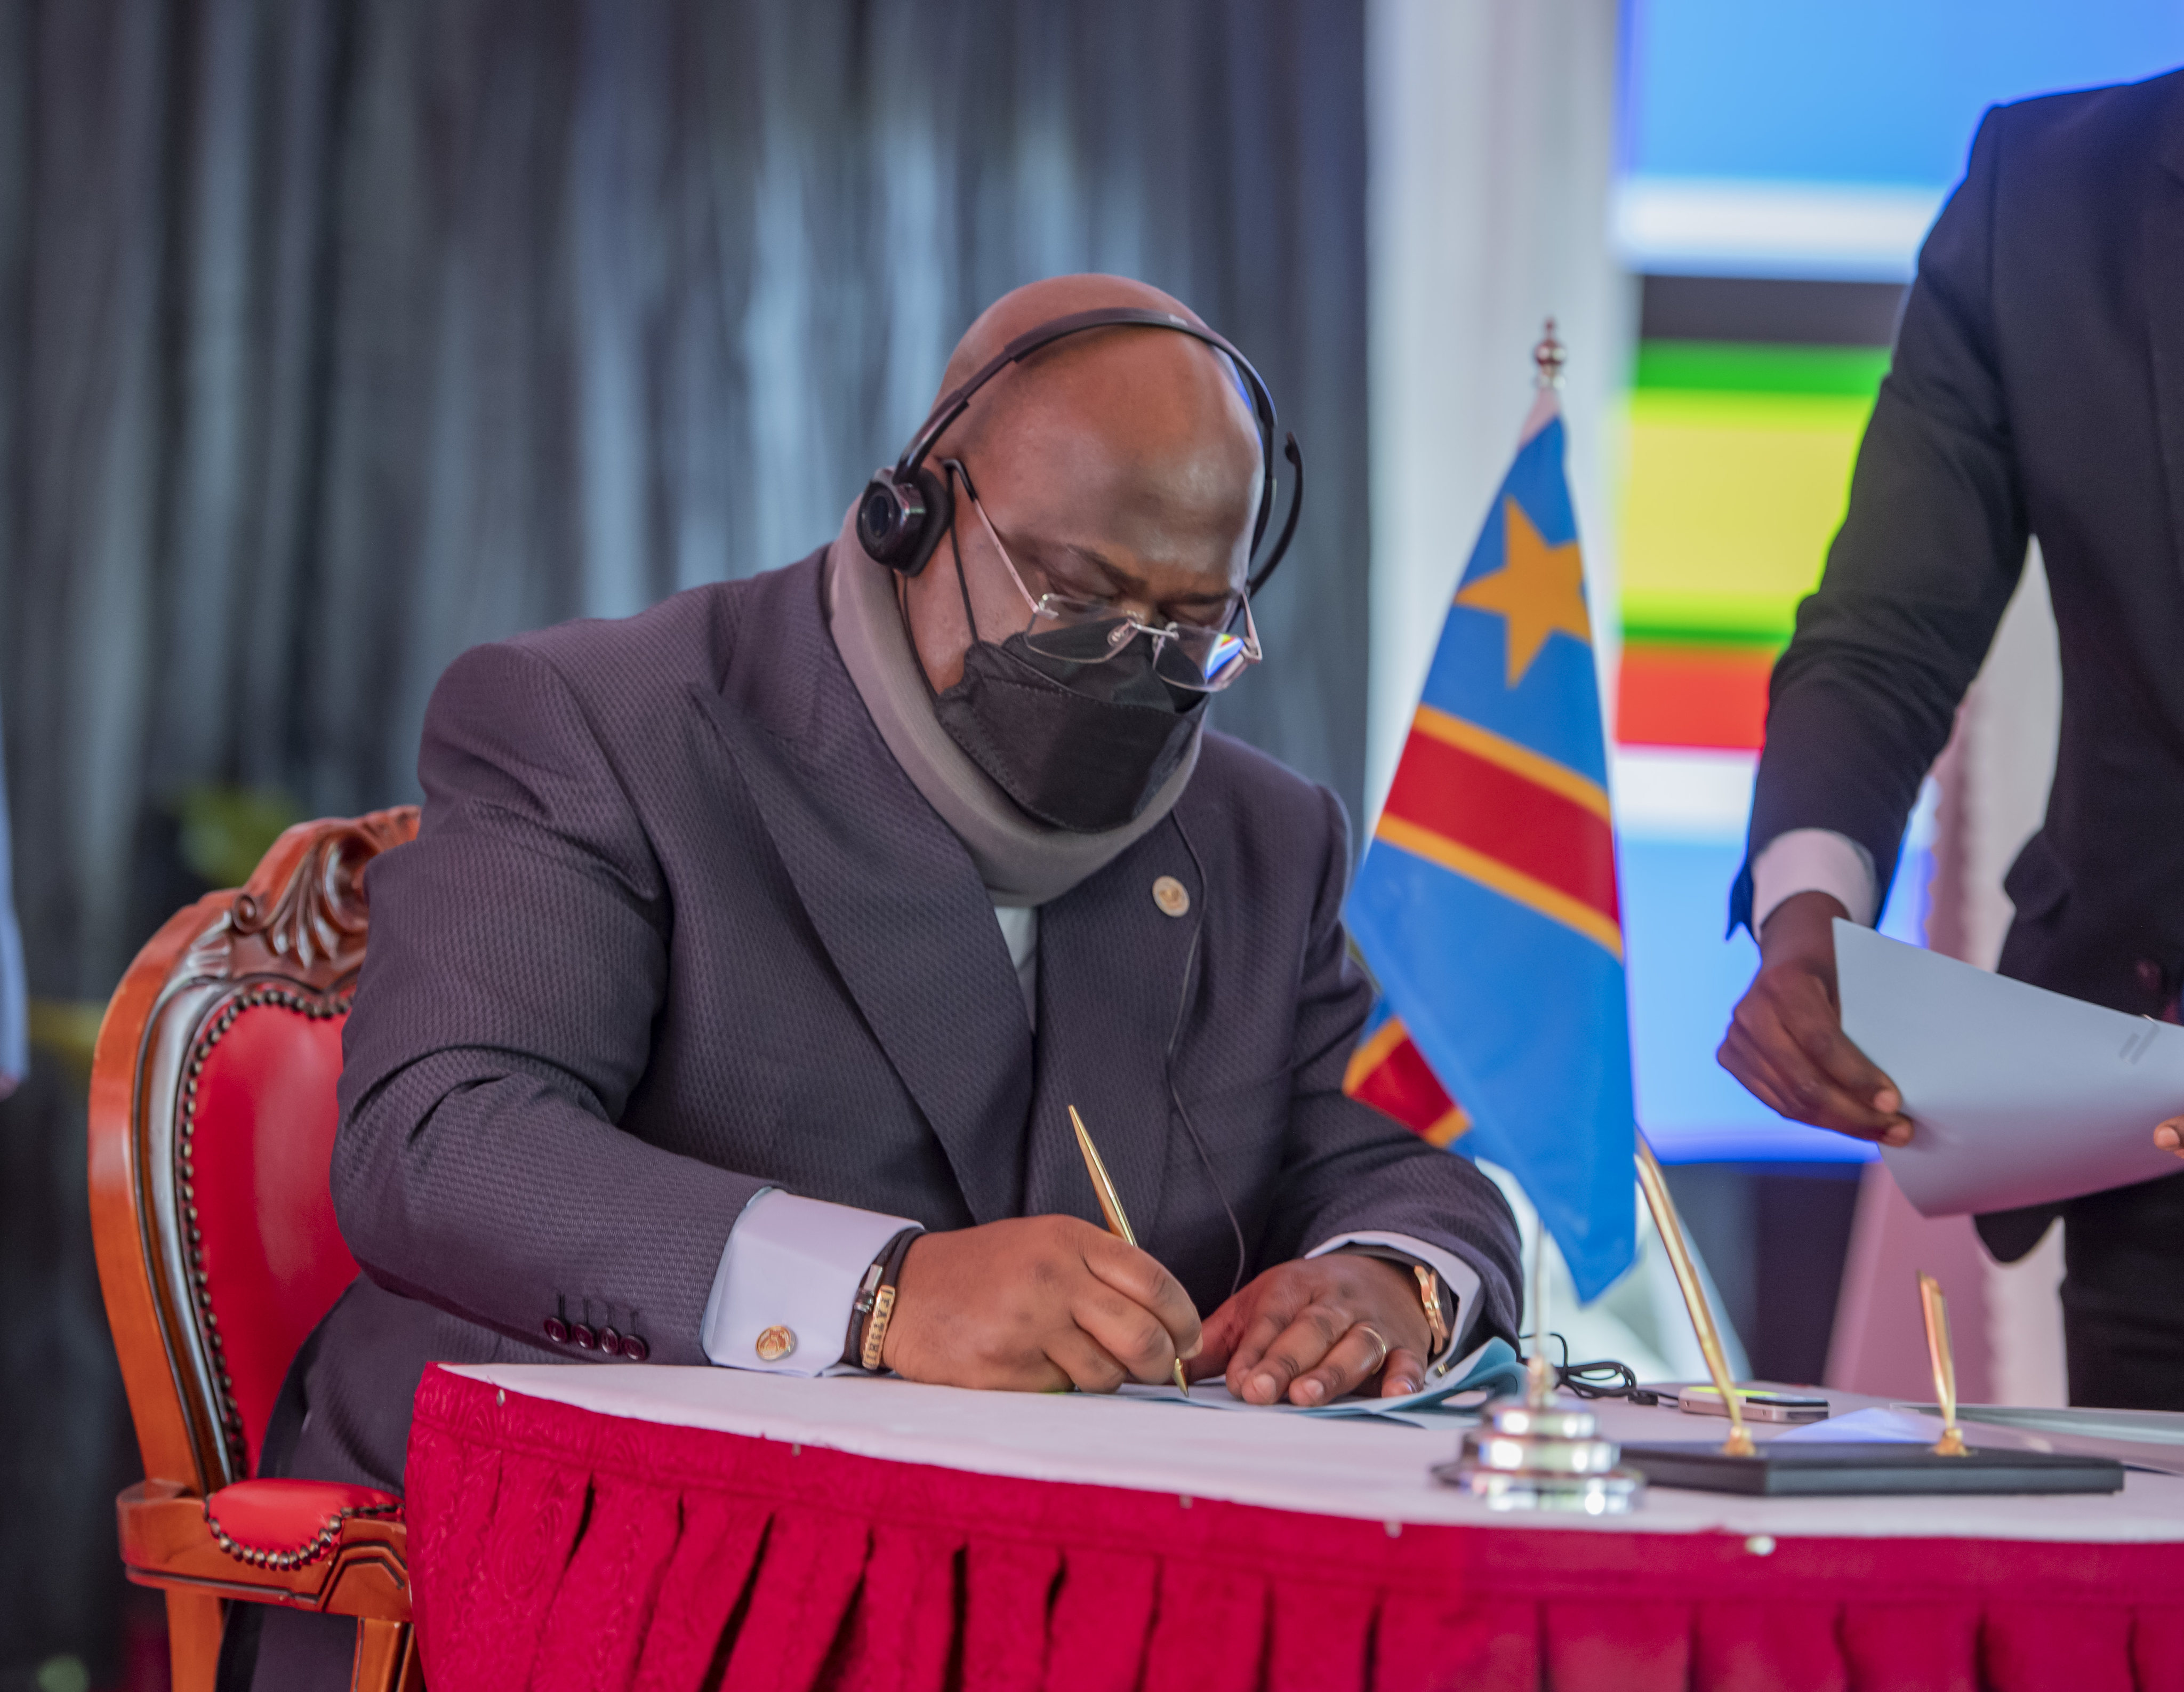 DR Congo President Felix Tshisekedi signs the Treaty of accession by his country to the East African Community in Nairobi on April 8, 2022. File